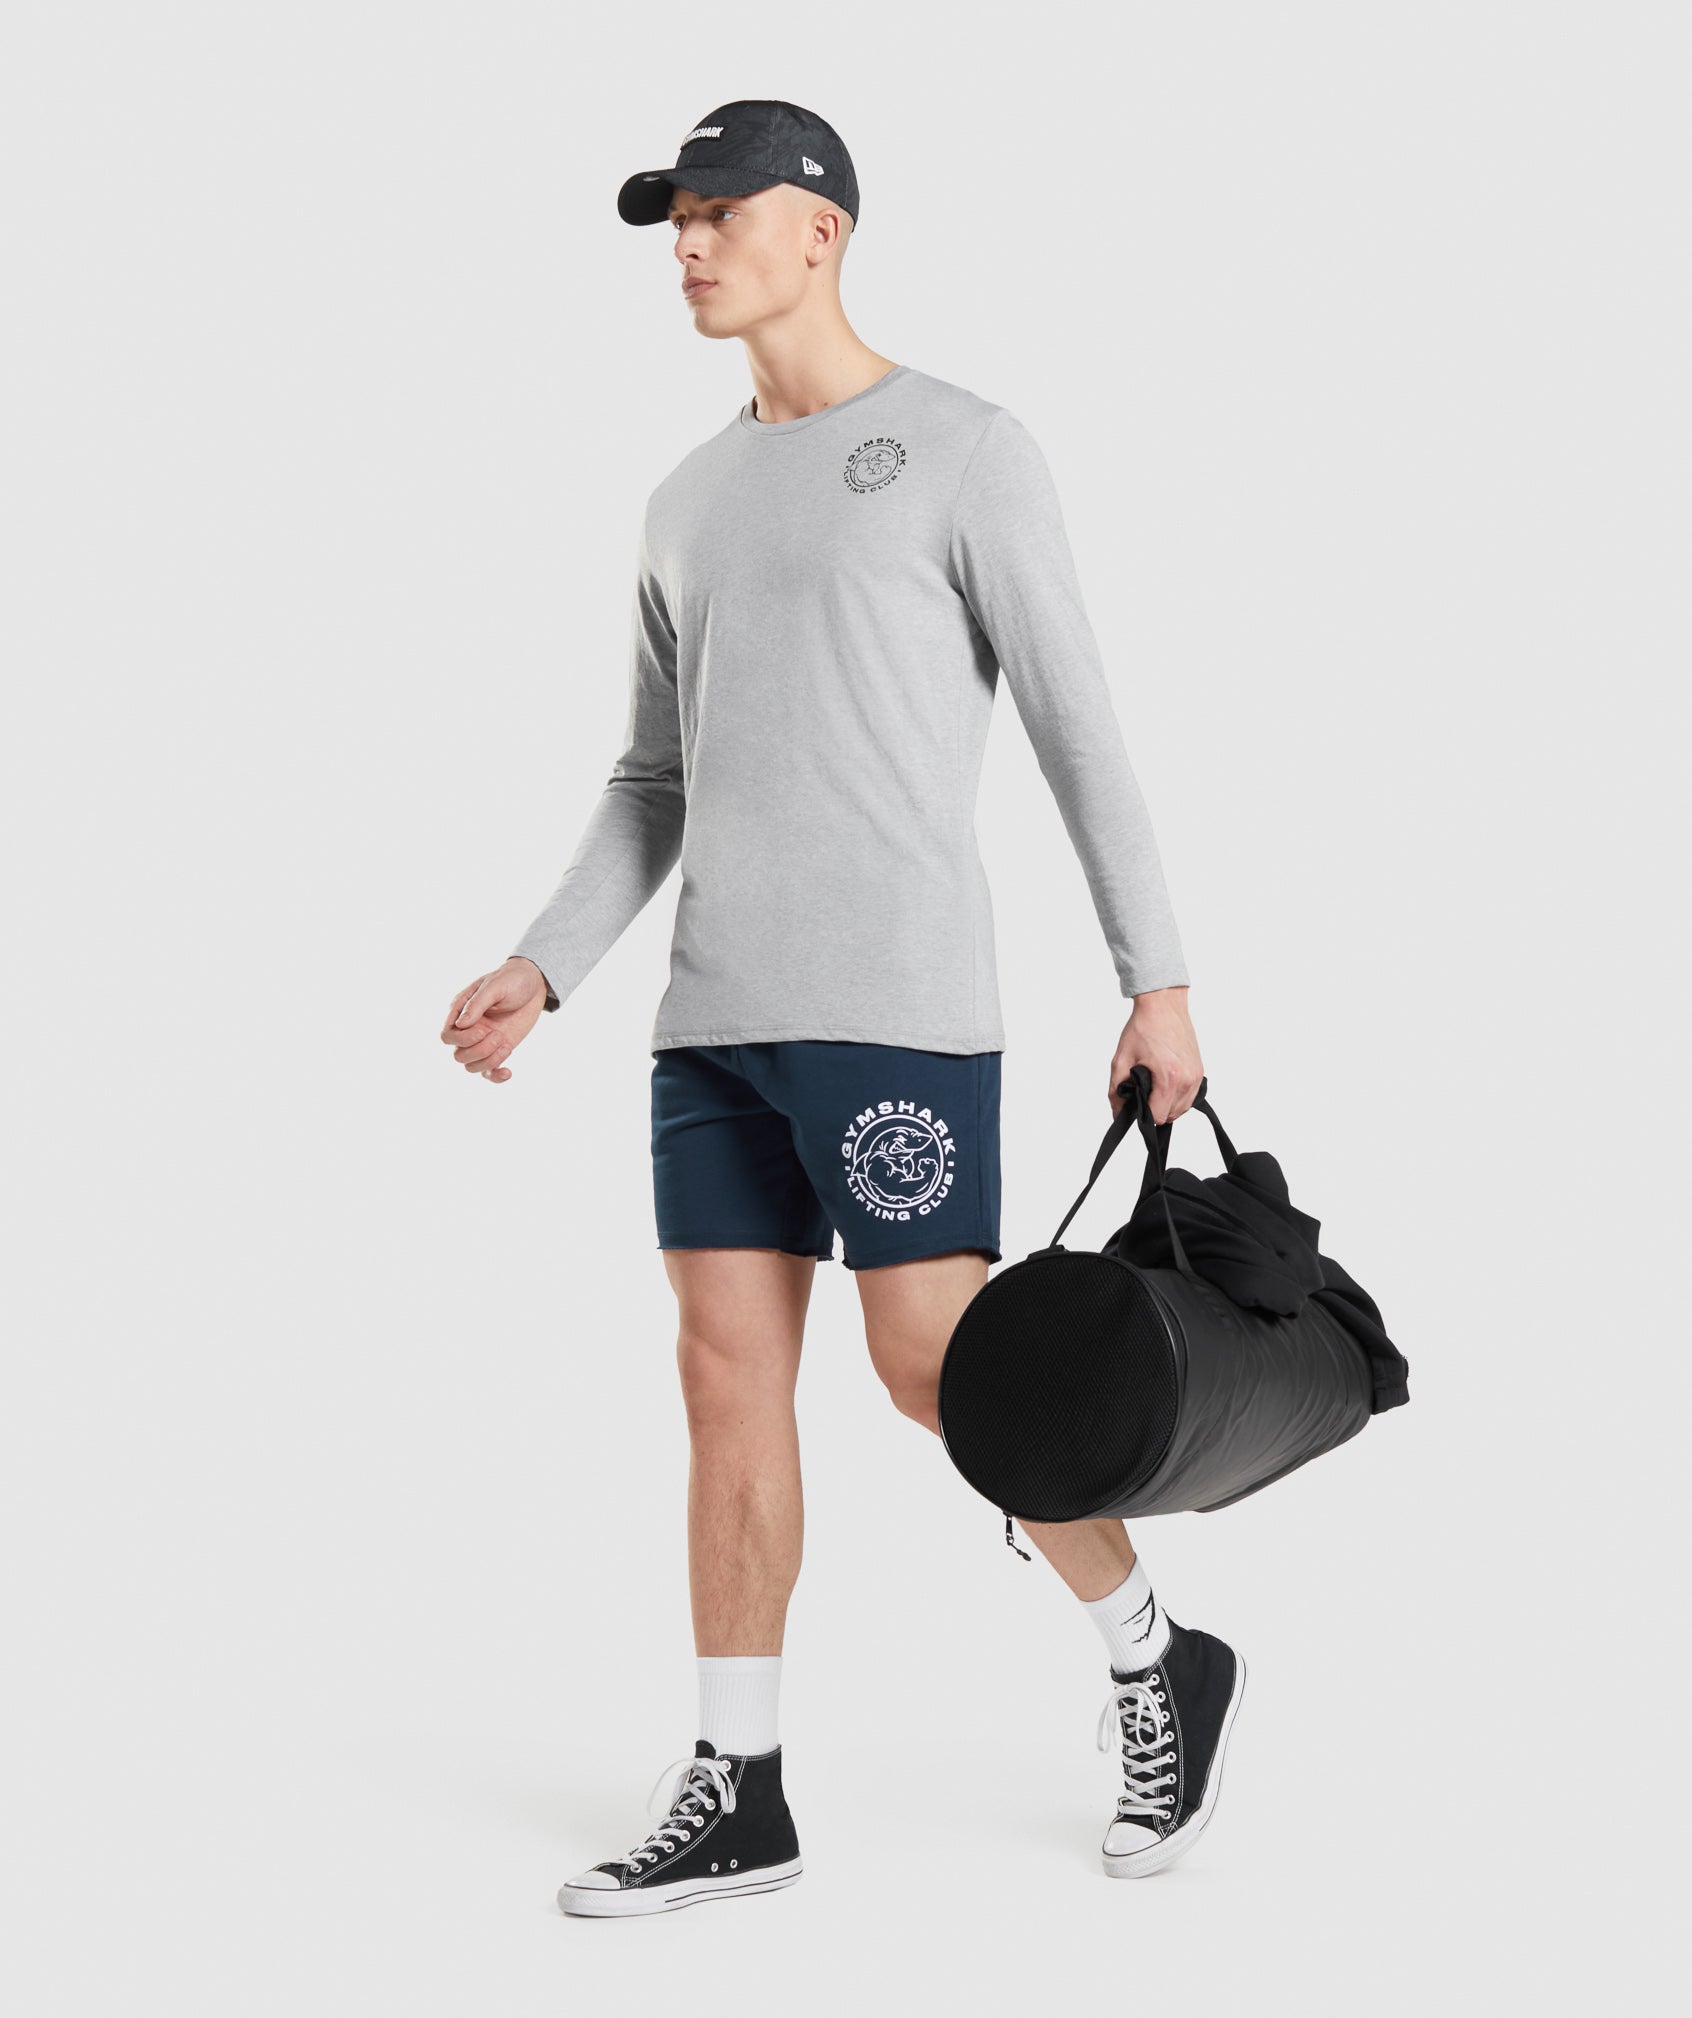 Legacy Long Sleeve T-Shirt in Light Grey Core Marl - view 4